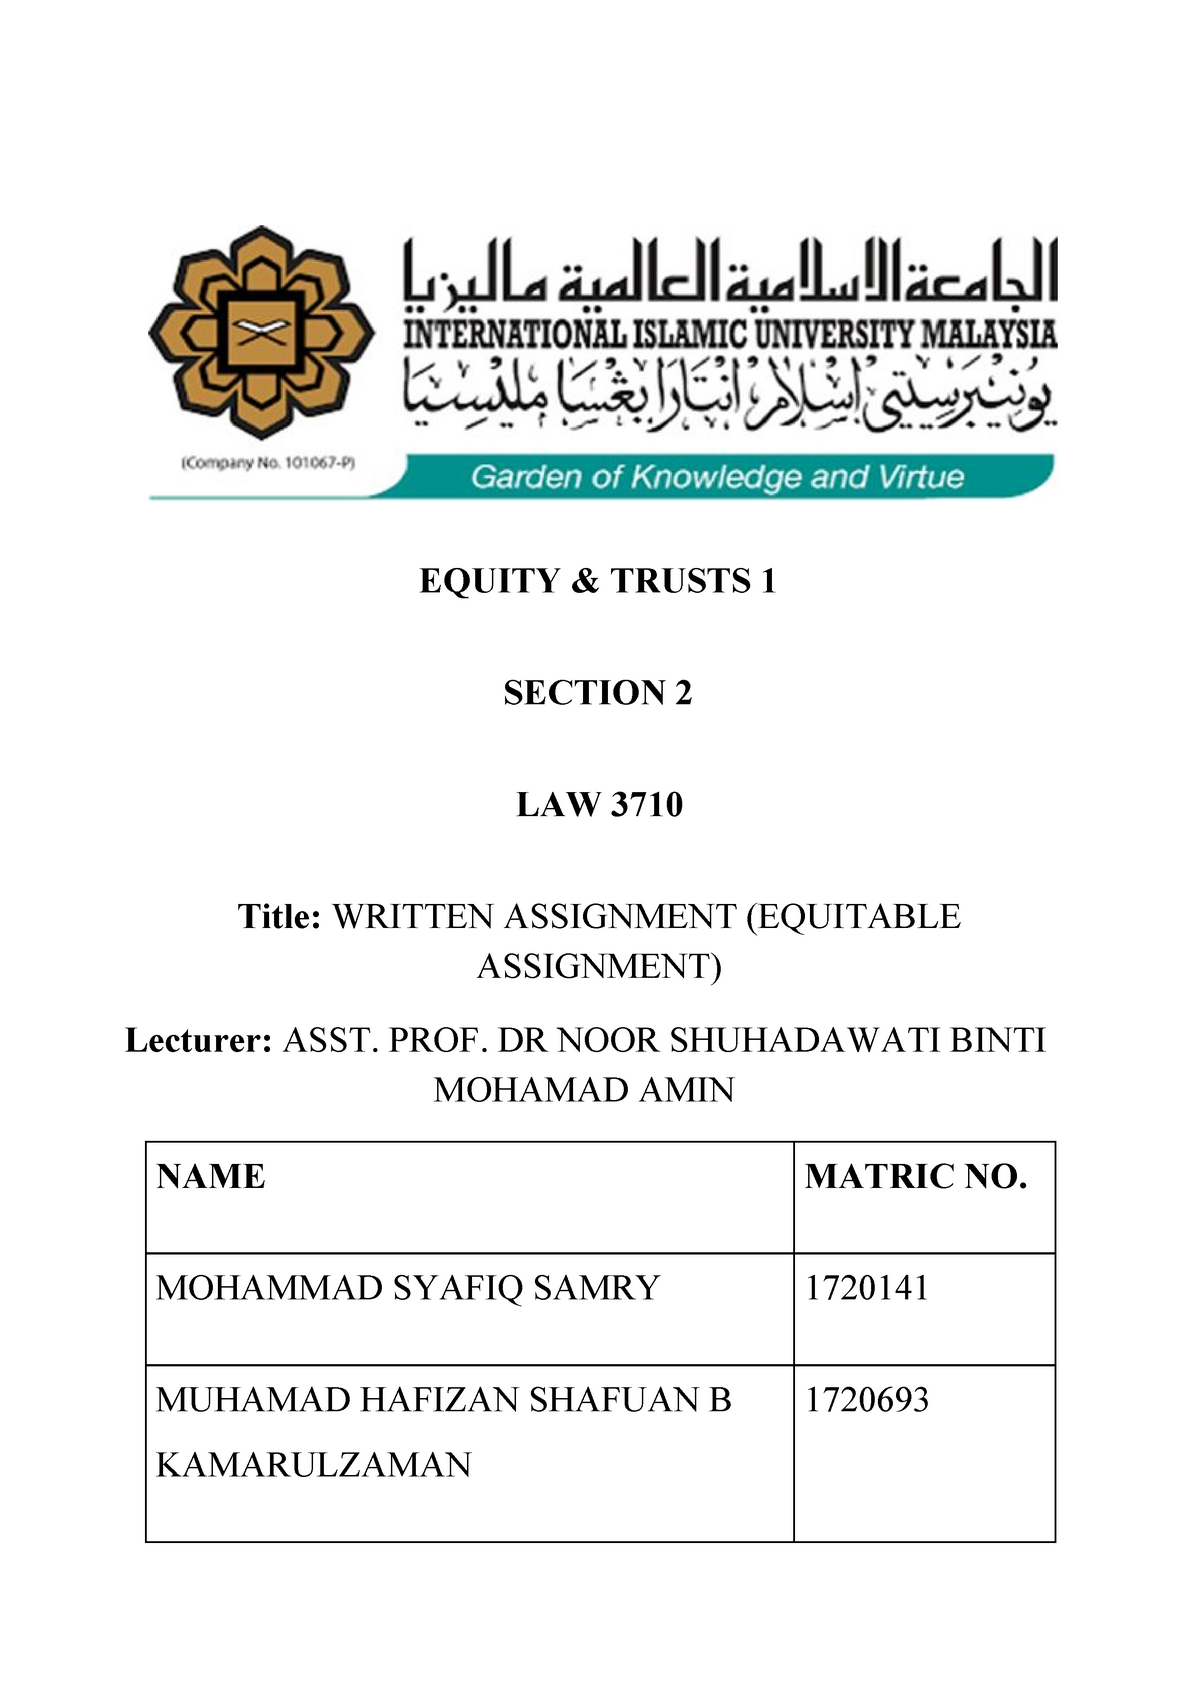 equitable assignment in english law